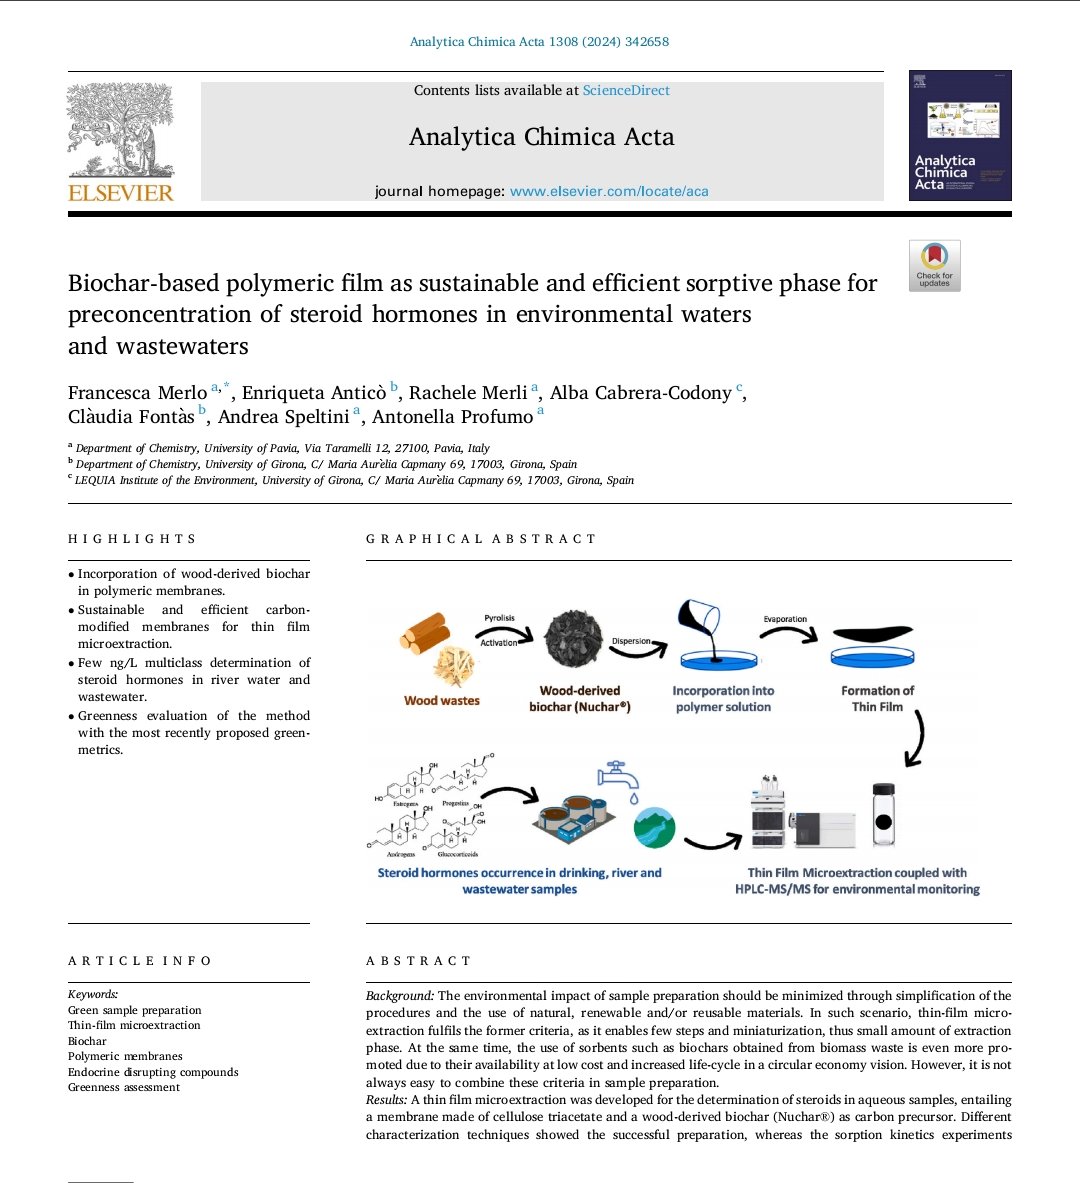 📢 New paper from our research collab with Pavia University @unipv & @QuimicaUdG 🌱🔬 On the development of a cutting-edge biochar-based polymeric film to efficiently concentrate steroid hormones in water & wastewater 🌊⚗️ @LEQUIA_UdG doi.org/10.1016/j.aca.…